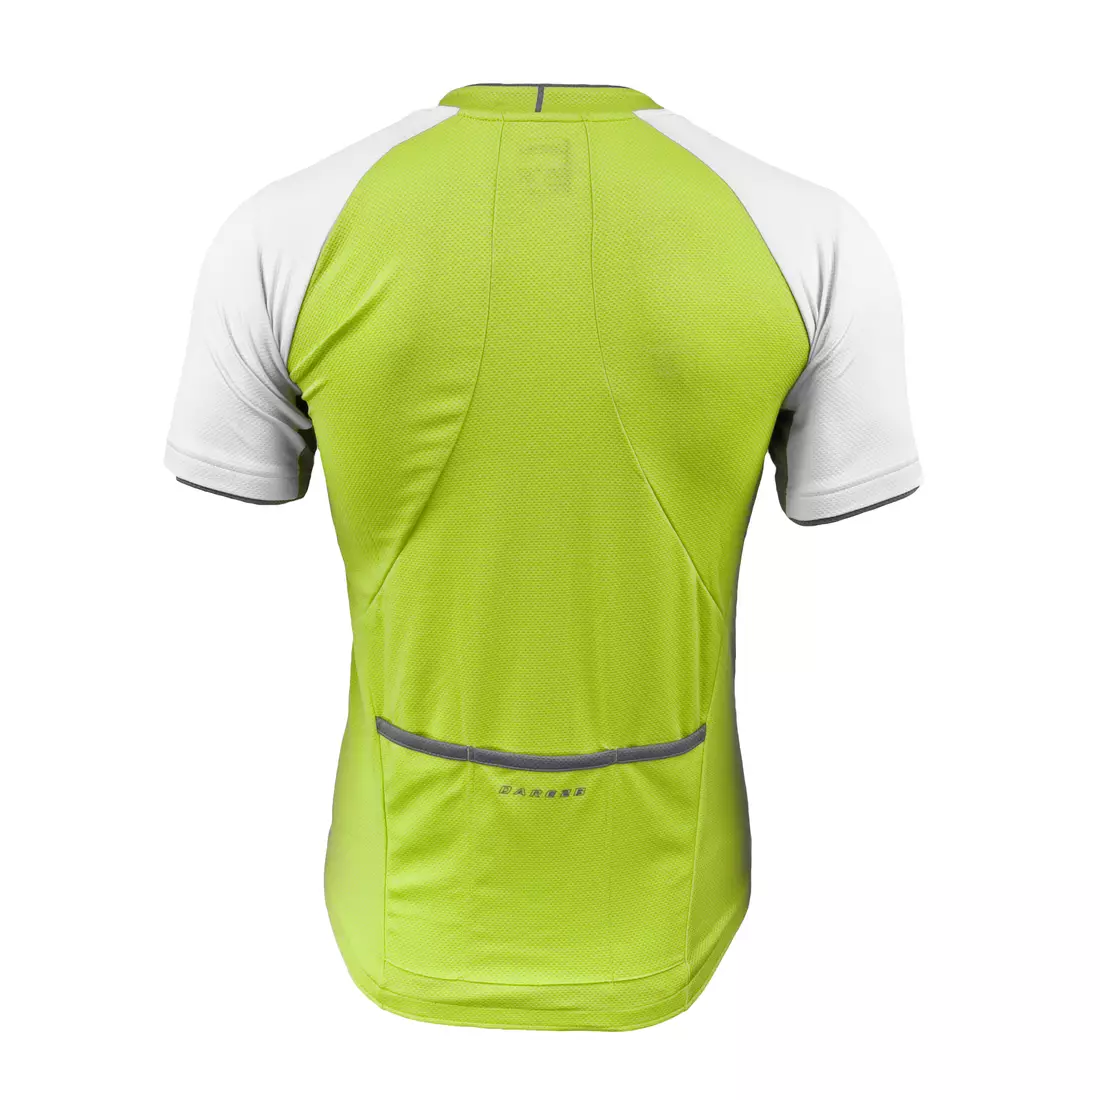 DARE2B EMANATE - men's cycling jersey, DMT108-65C